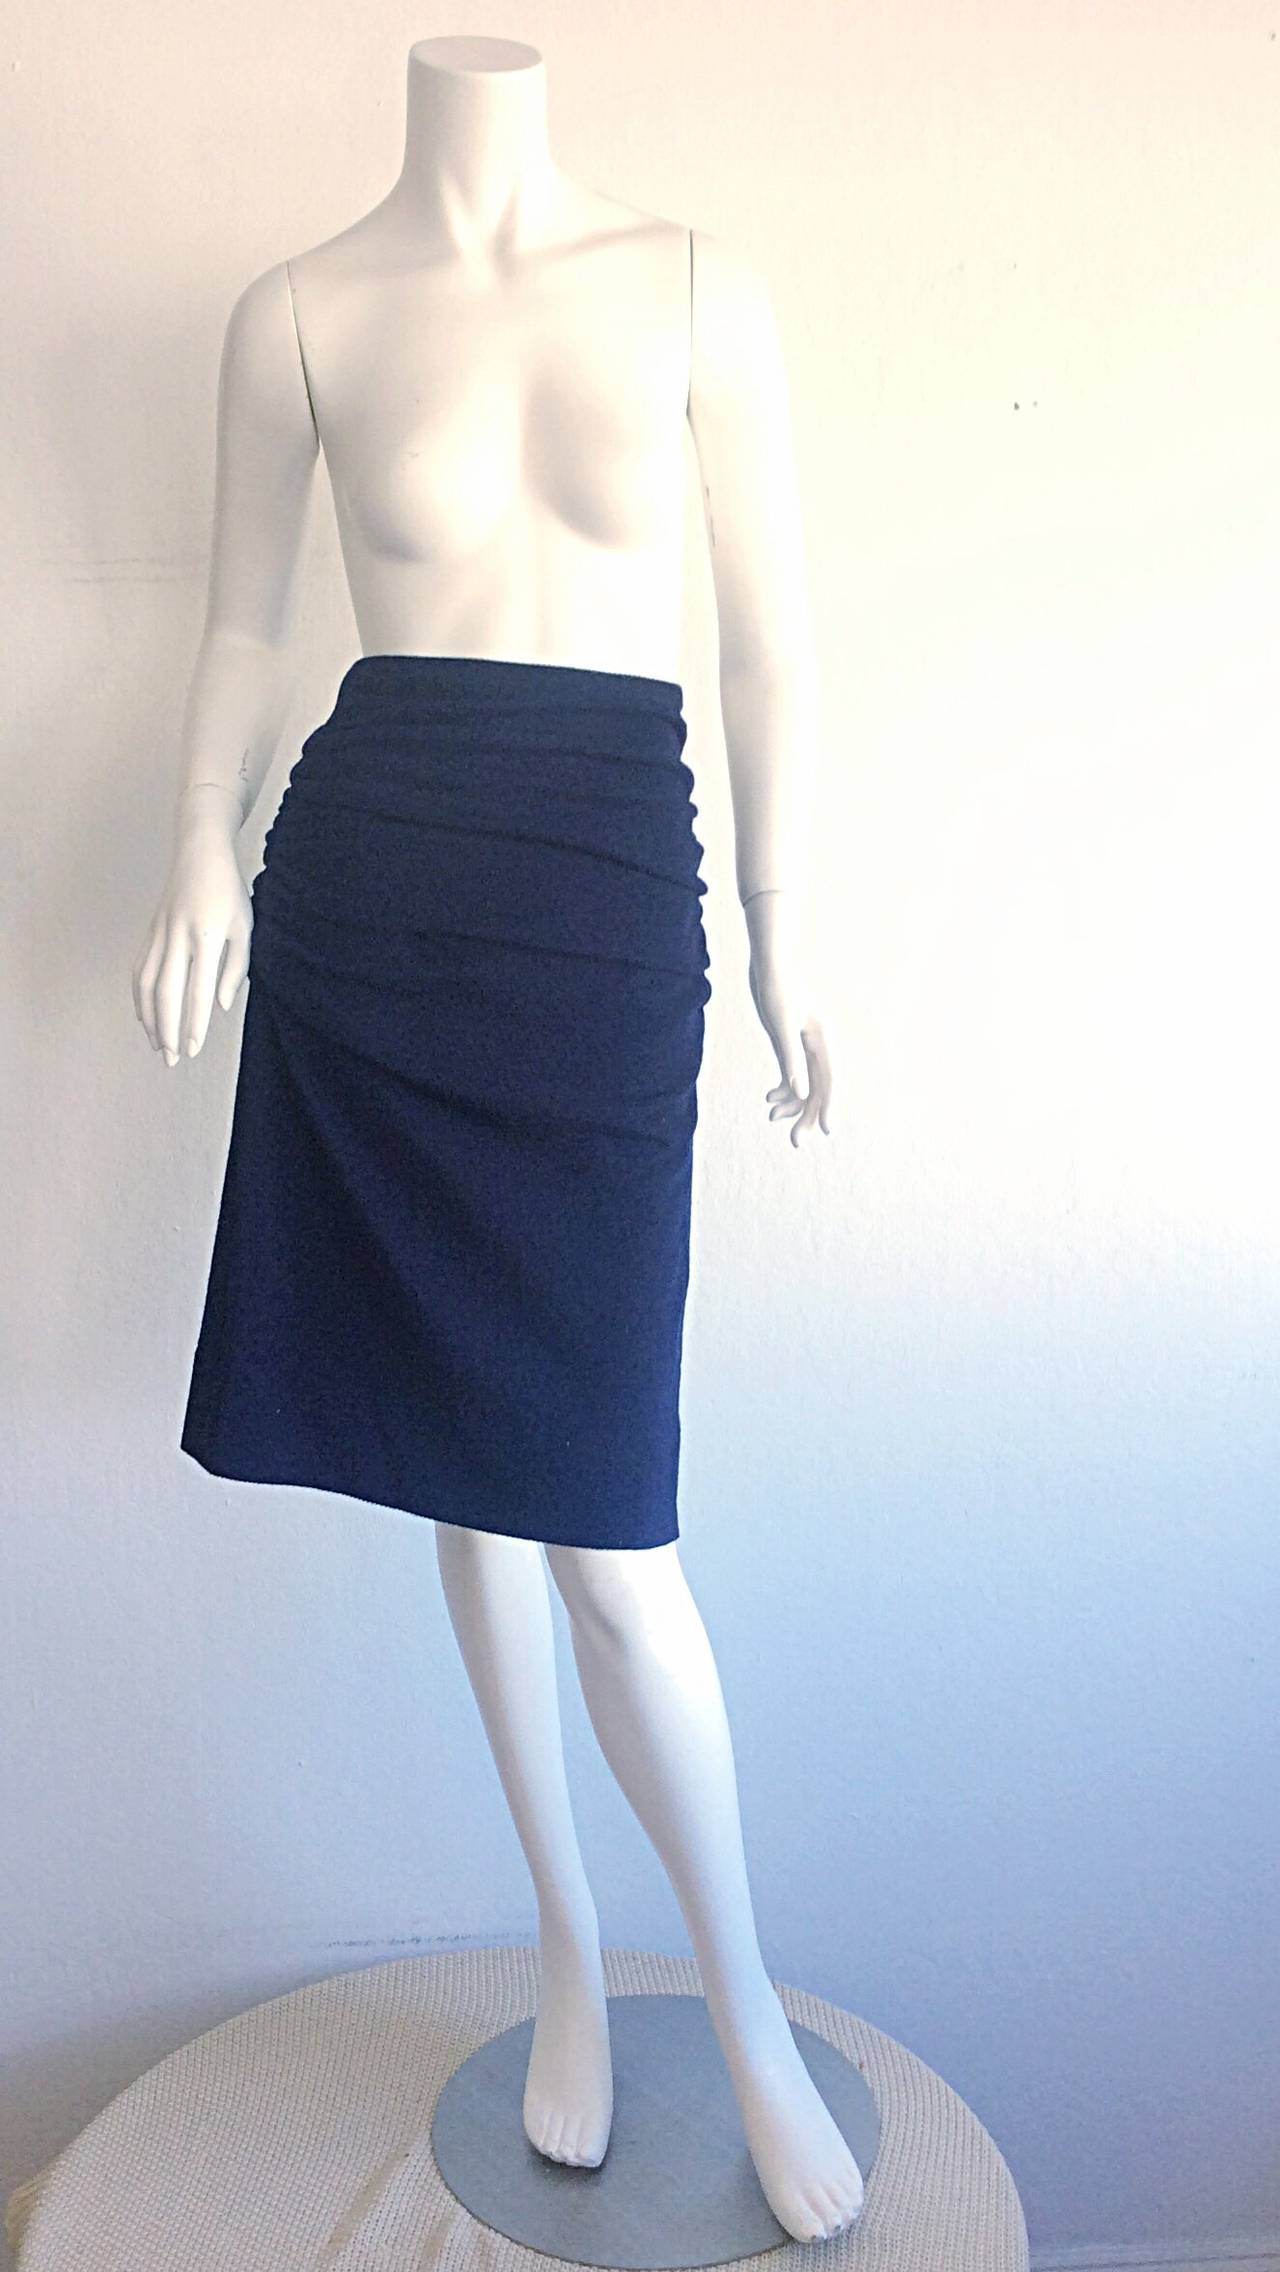 Figure flattering vintage Karl Lagerfeld navy skirt! Features ruching on front and back, with a slight asymmetrical hem. The finest of wools! Looks amazing on the body! Great with a sleek blouse and belt, or great with a blazer! Fully lined. Made in